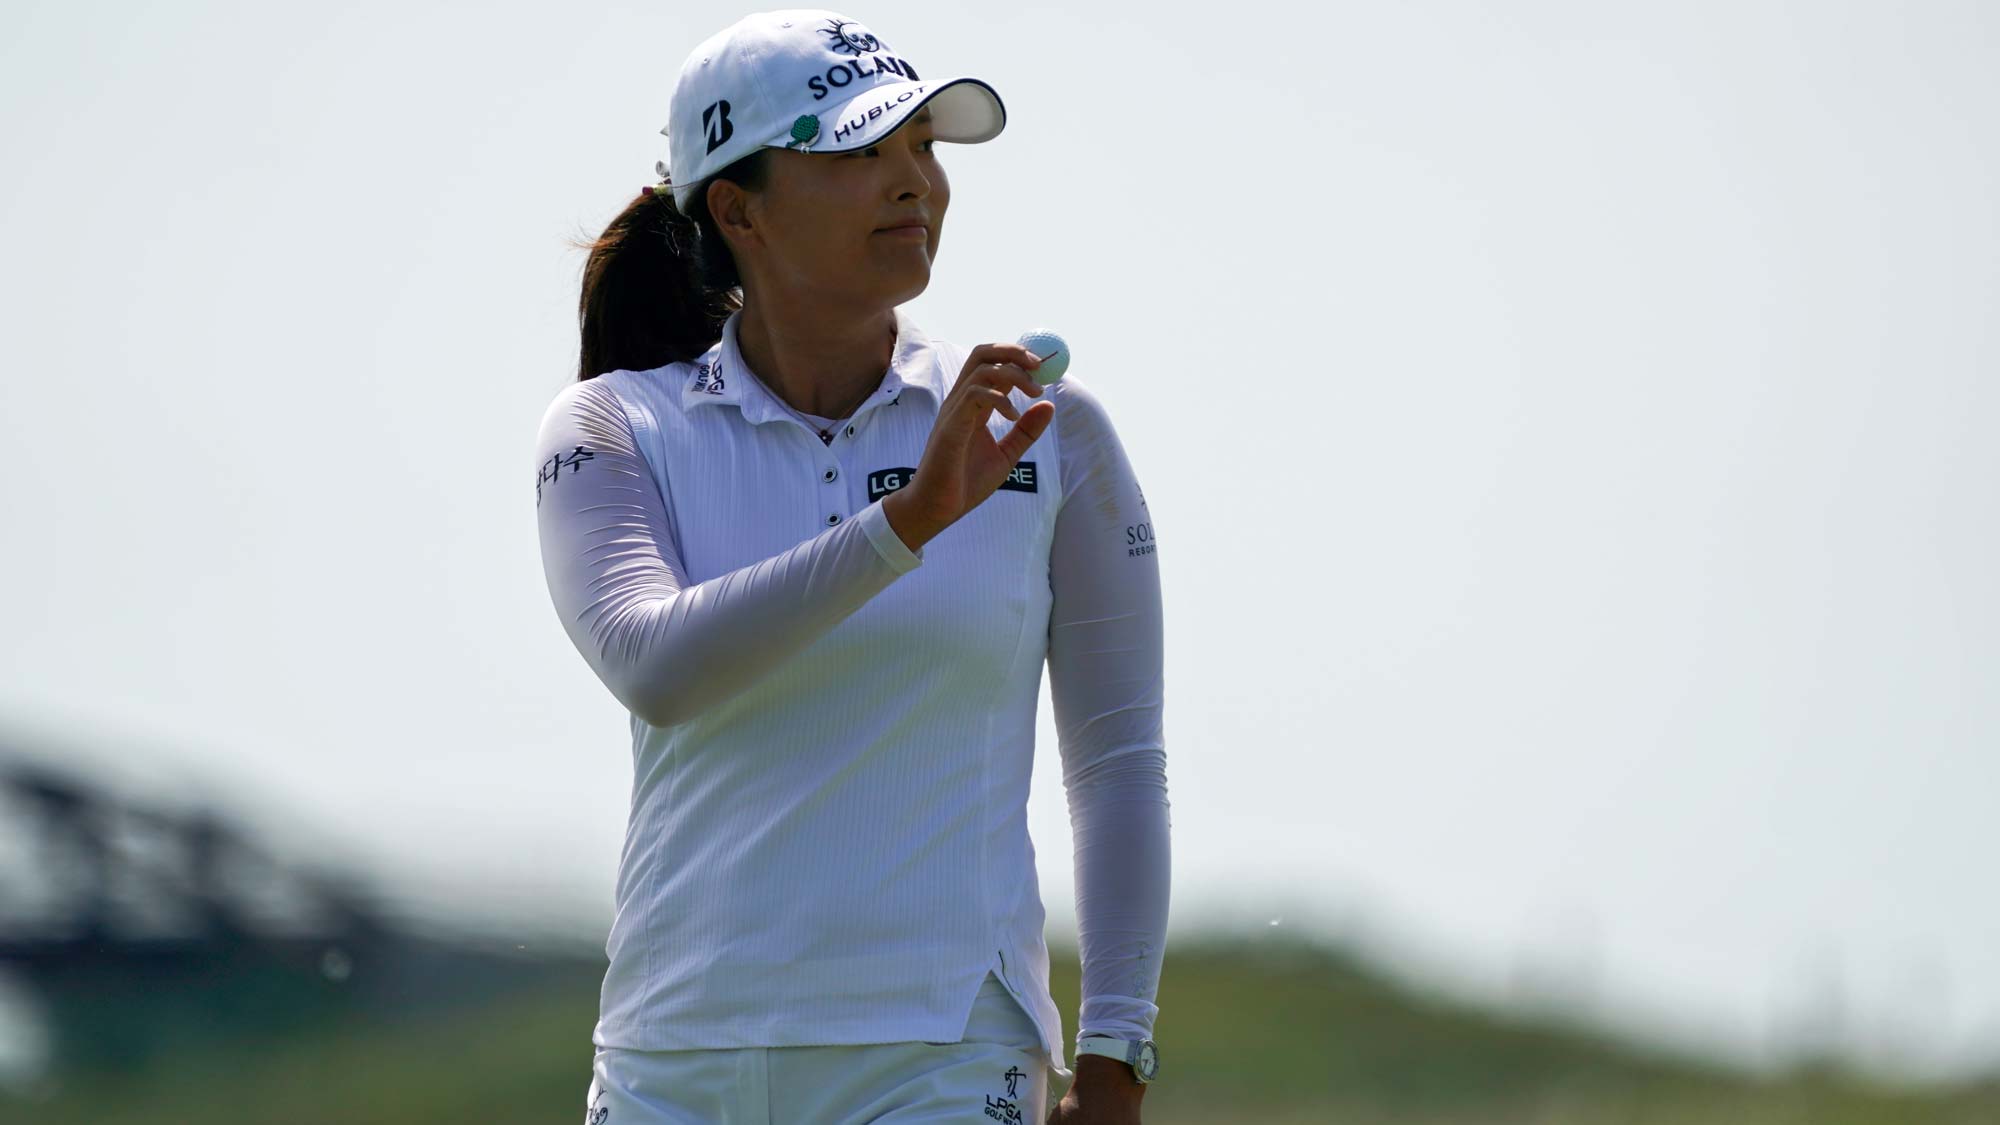 Jin Young Ko of Korea reacts to the crowd after making a putt on the second hole during the third round of the Volunteers of America Classic